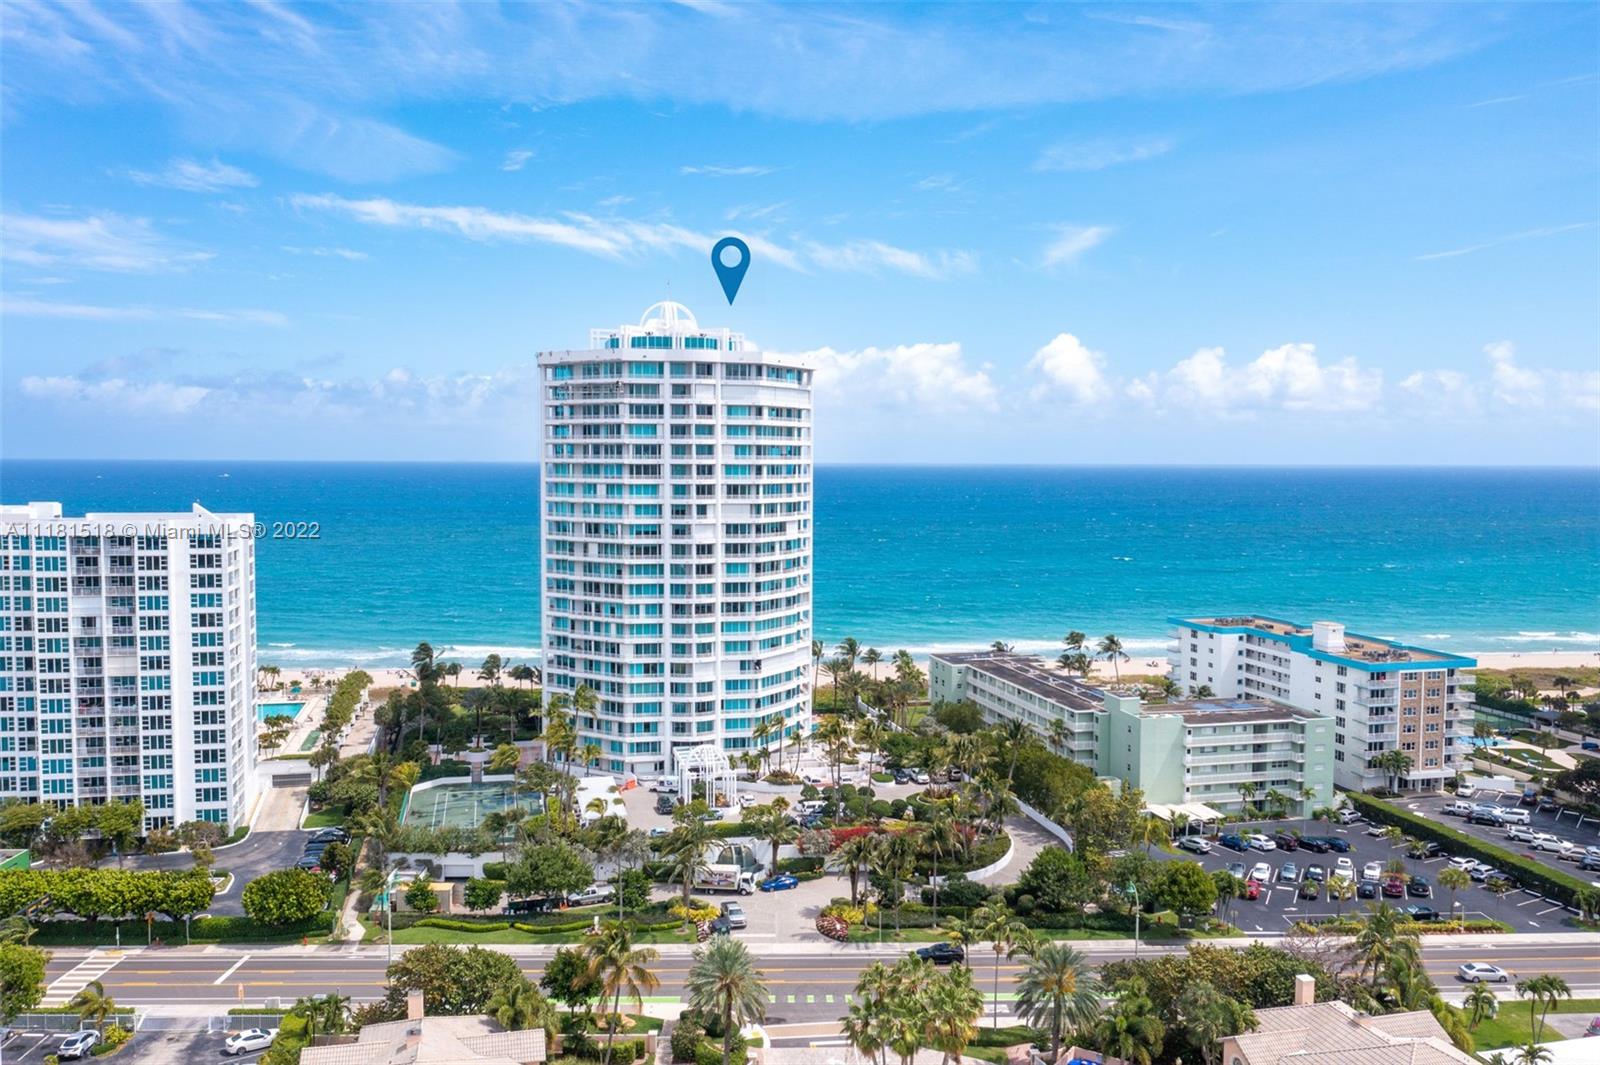 Welcome home to this stunning oceanfront condo located in Lauderdale by the Sea, Fl. This unit has a spacious 3200 SQFT of interior living space, and a wrap around balcony with SE scenic ocean views. 3 oversized bedrooms and 3 full bathrooms make this a highly desirable layout. Located on the 17th floor, you will have incredible sunrise and sunset views in addition to an abundance of amenities within the Cristelle. Some these include an oceanside private pool, gym access, saunas, clubrooms, direct beach access and more. Location is everything and you couldn't ask easier access to some of the best shopping and local restaurants that South Florida has to offer.